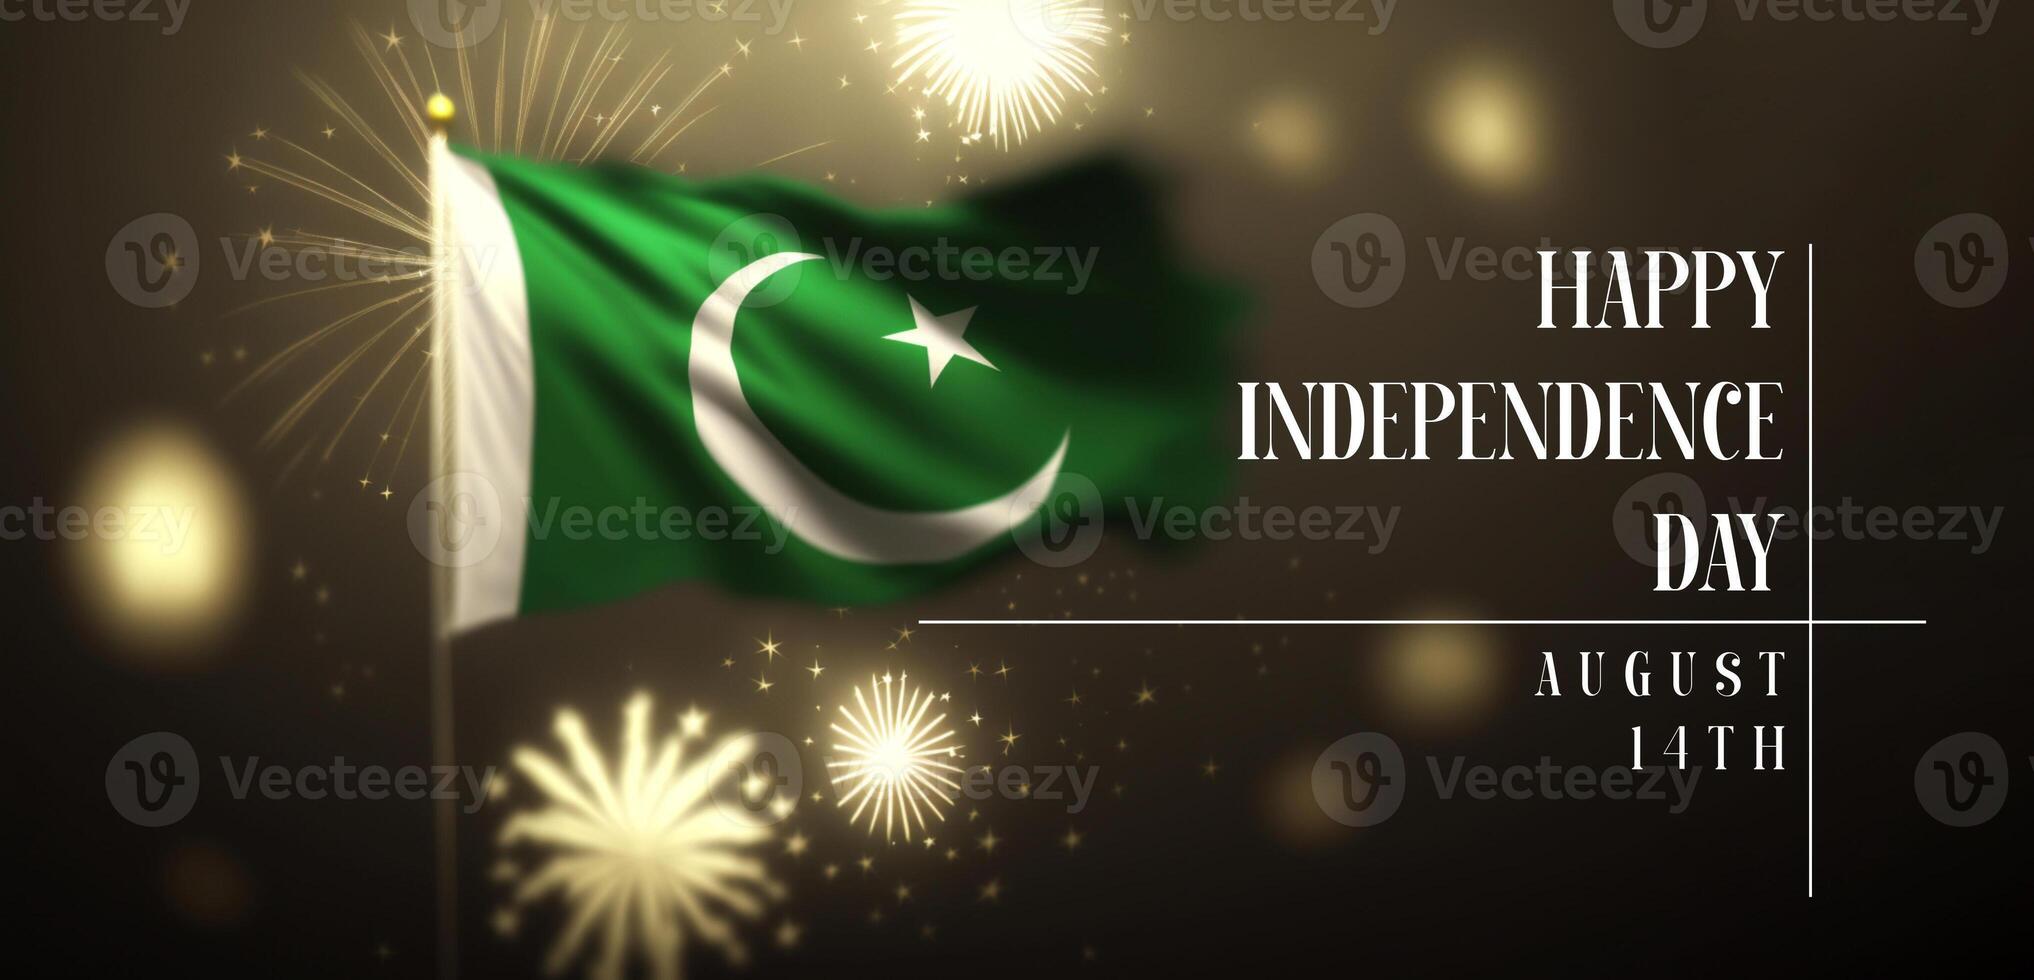 Independence day Pakistan banner with a flag on dark background with some fireworks and celebratory vibes photo